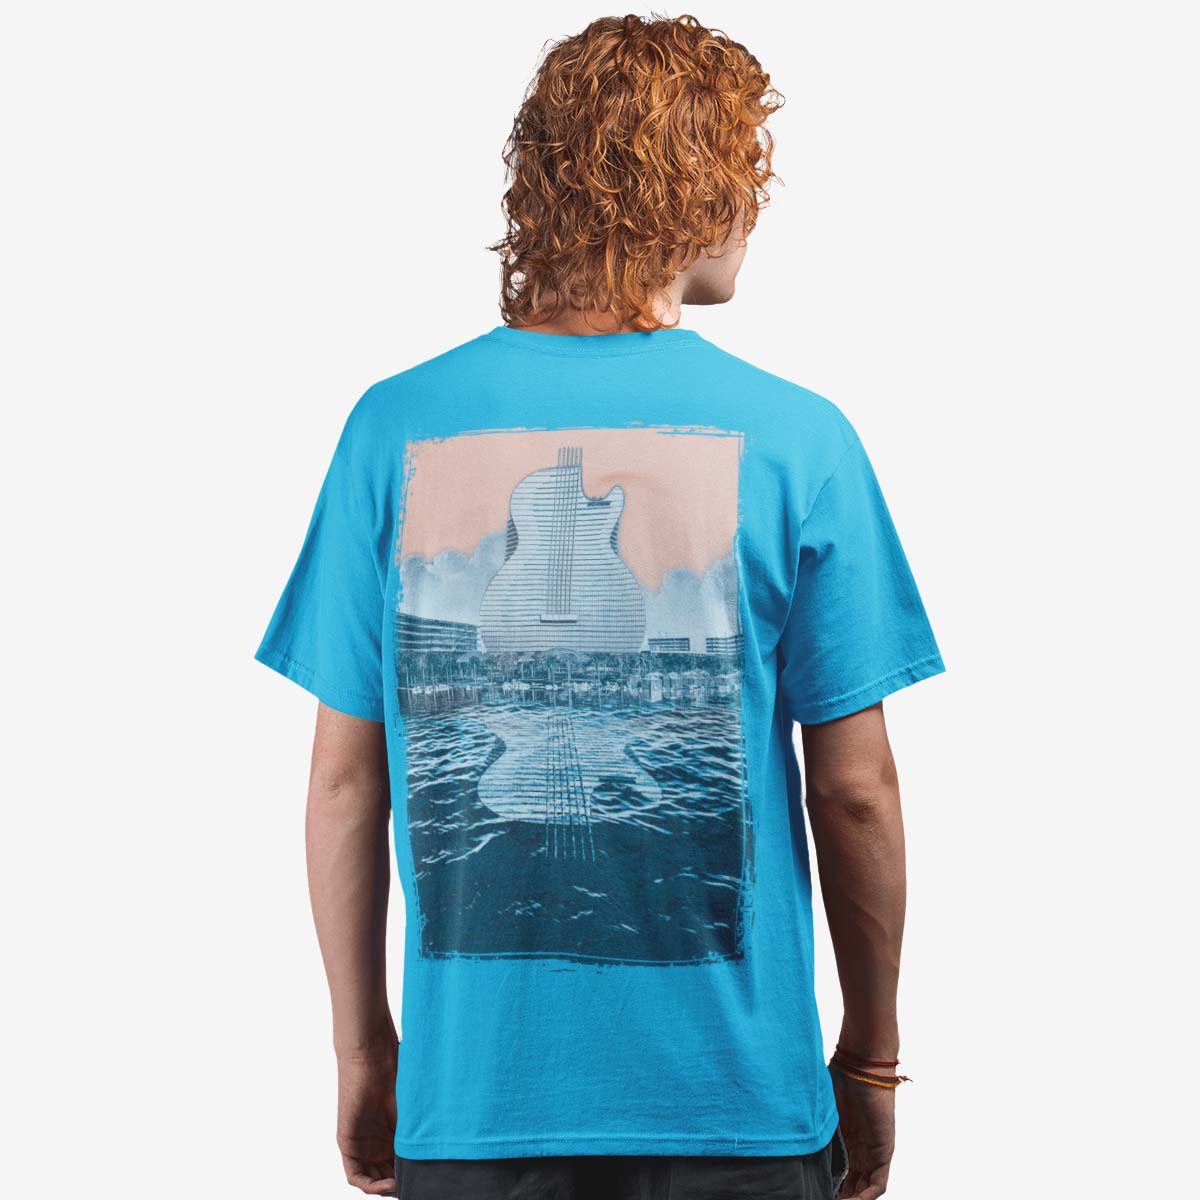 Guitar Hotel Adult Fit Tee in Aqua with Reflection Design image number 7